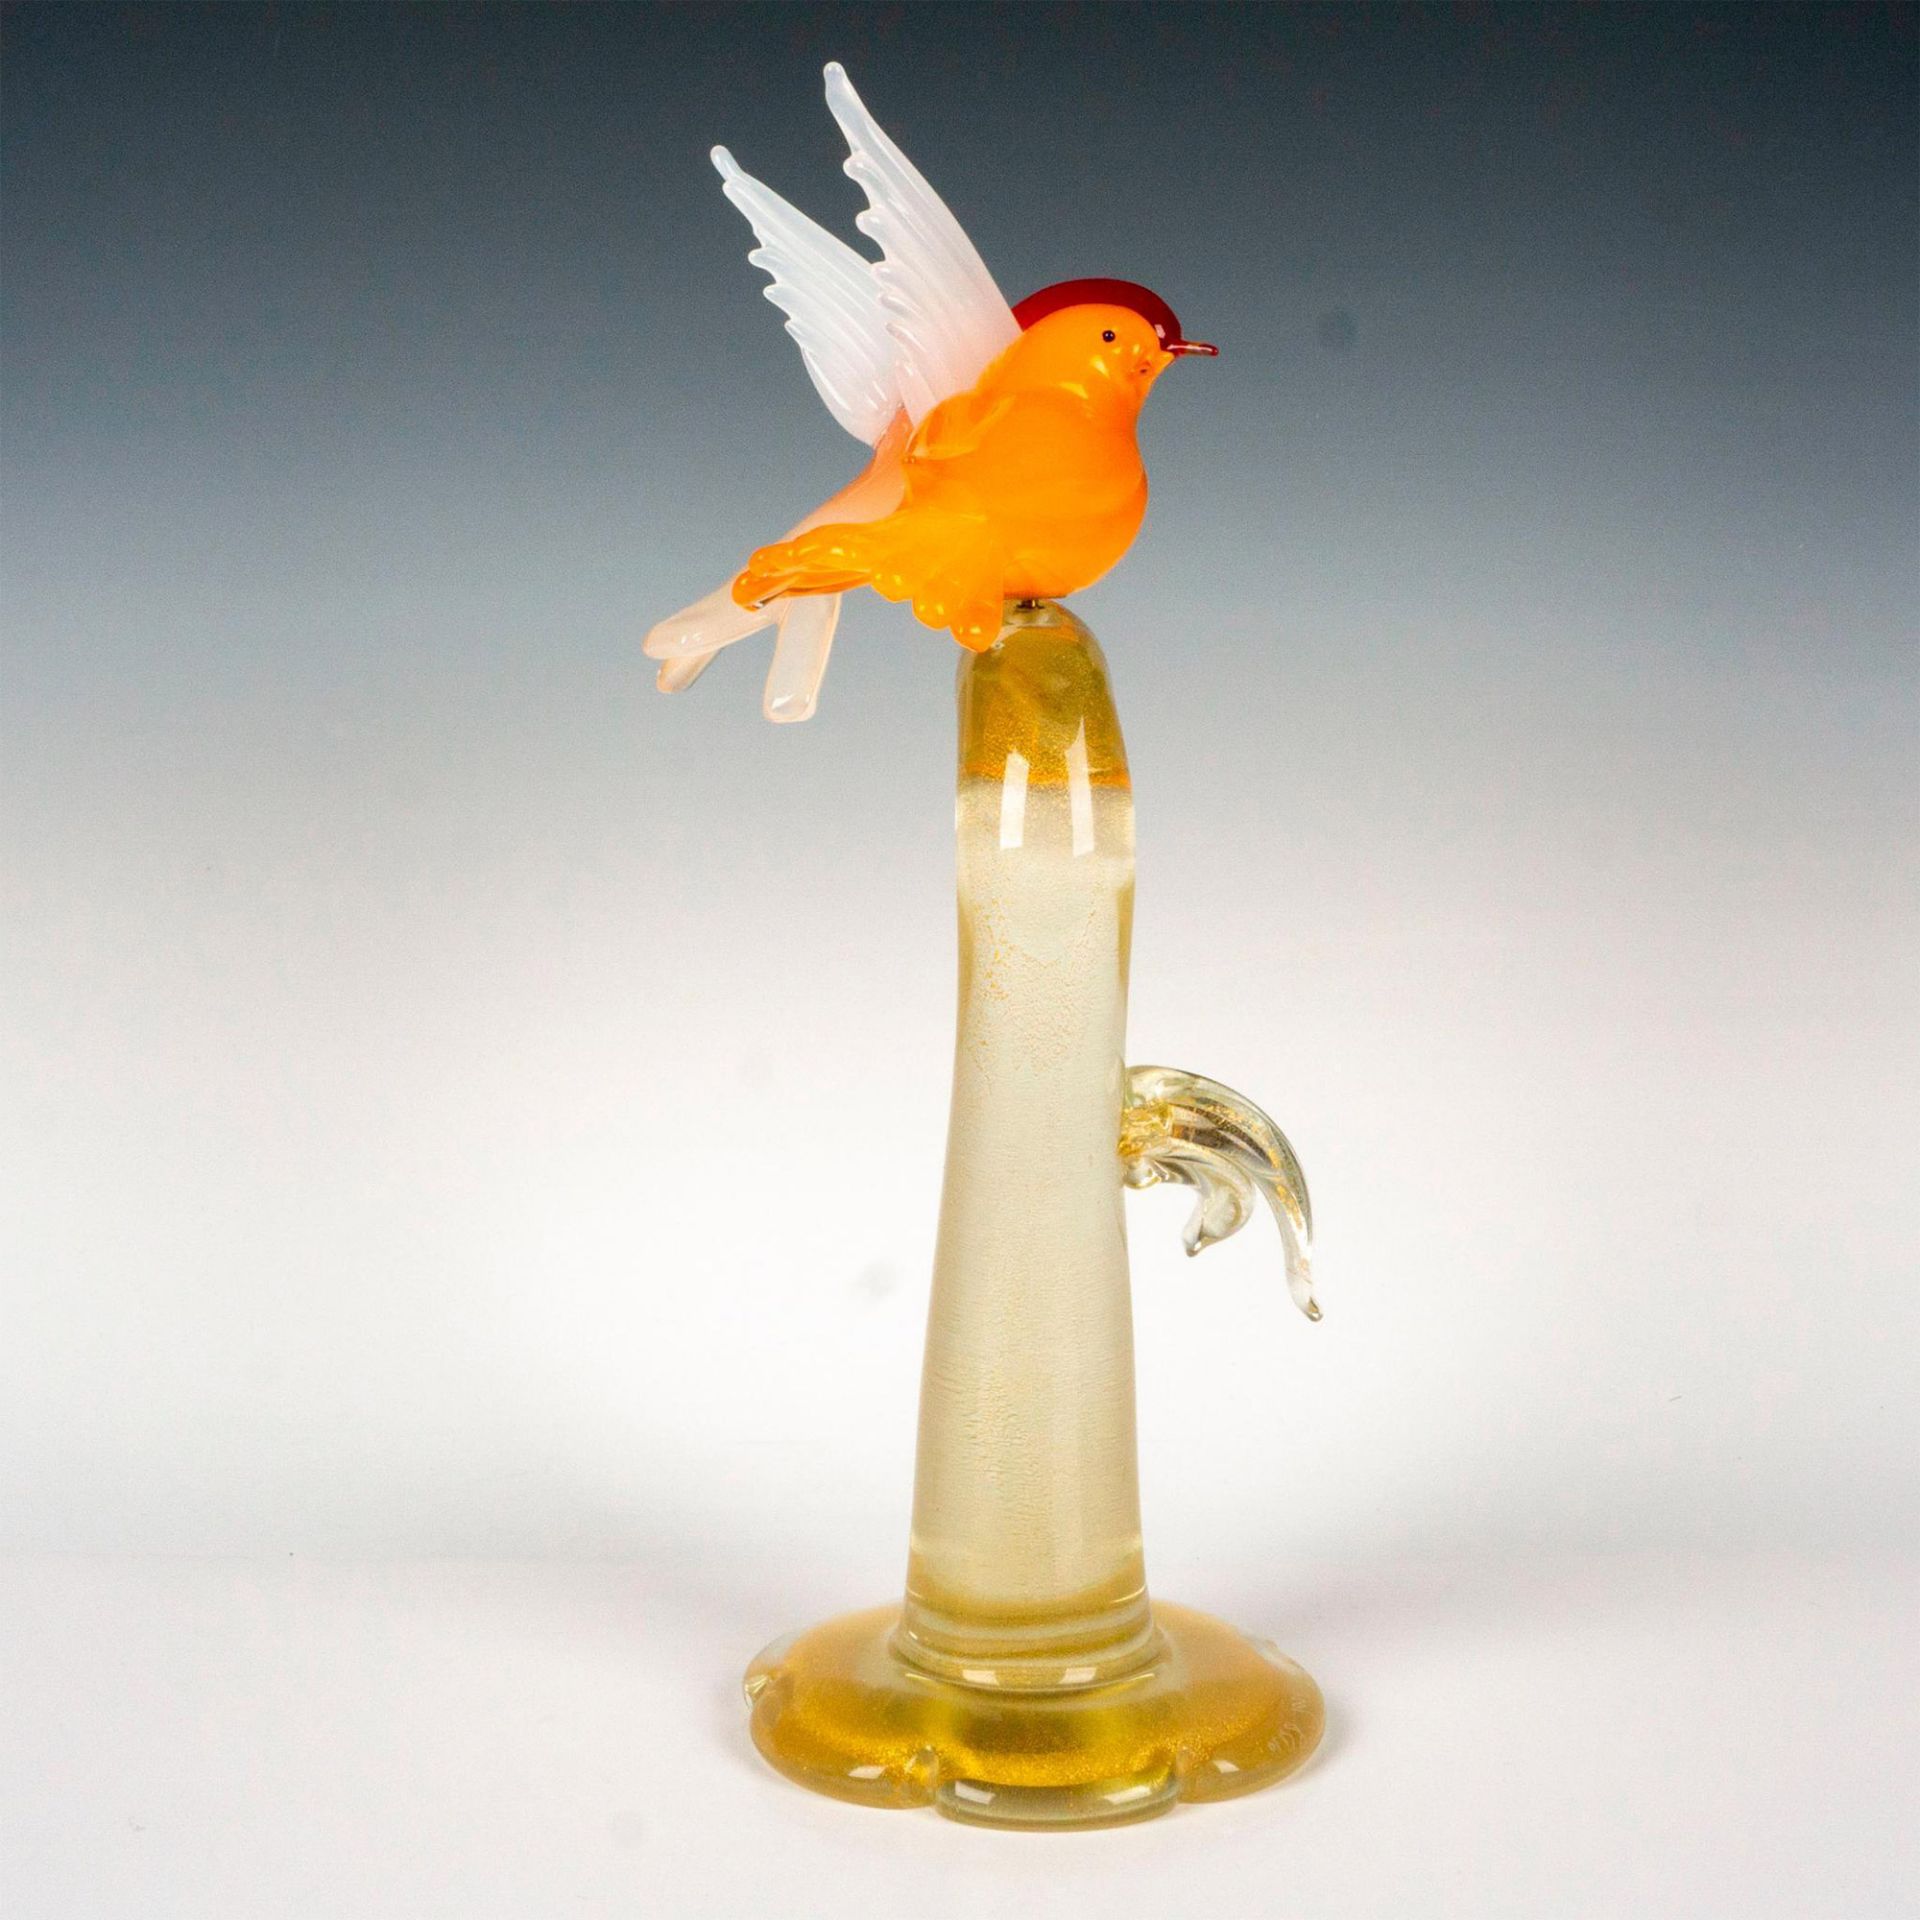 Murano Glass by Giuliano Tosi Sculpture, Birds on Branch - Image 2 of 5